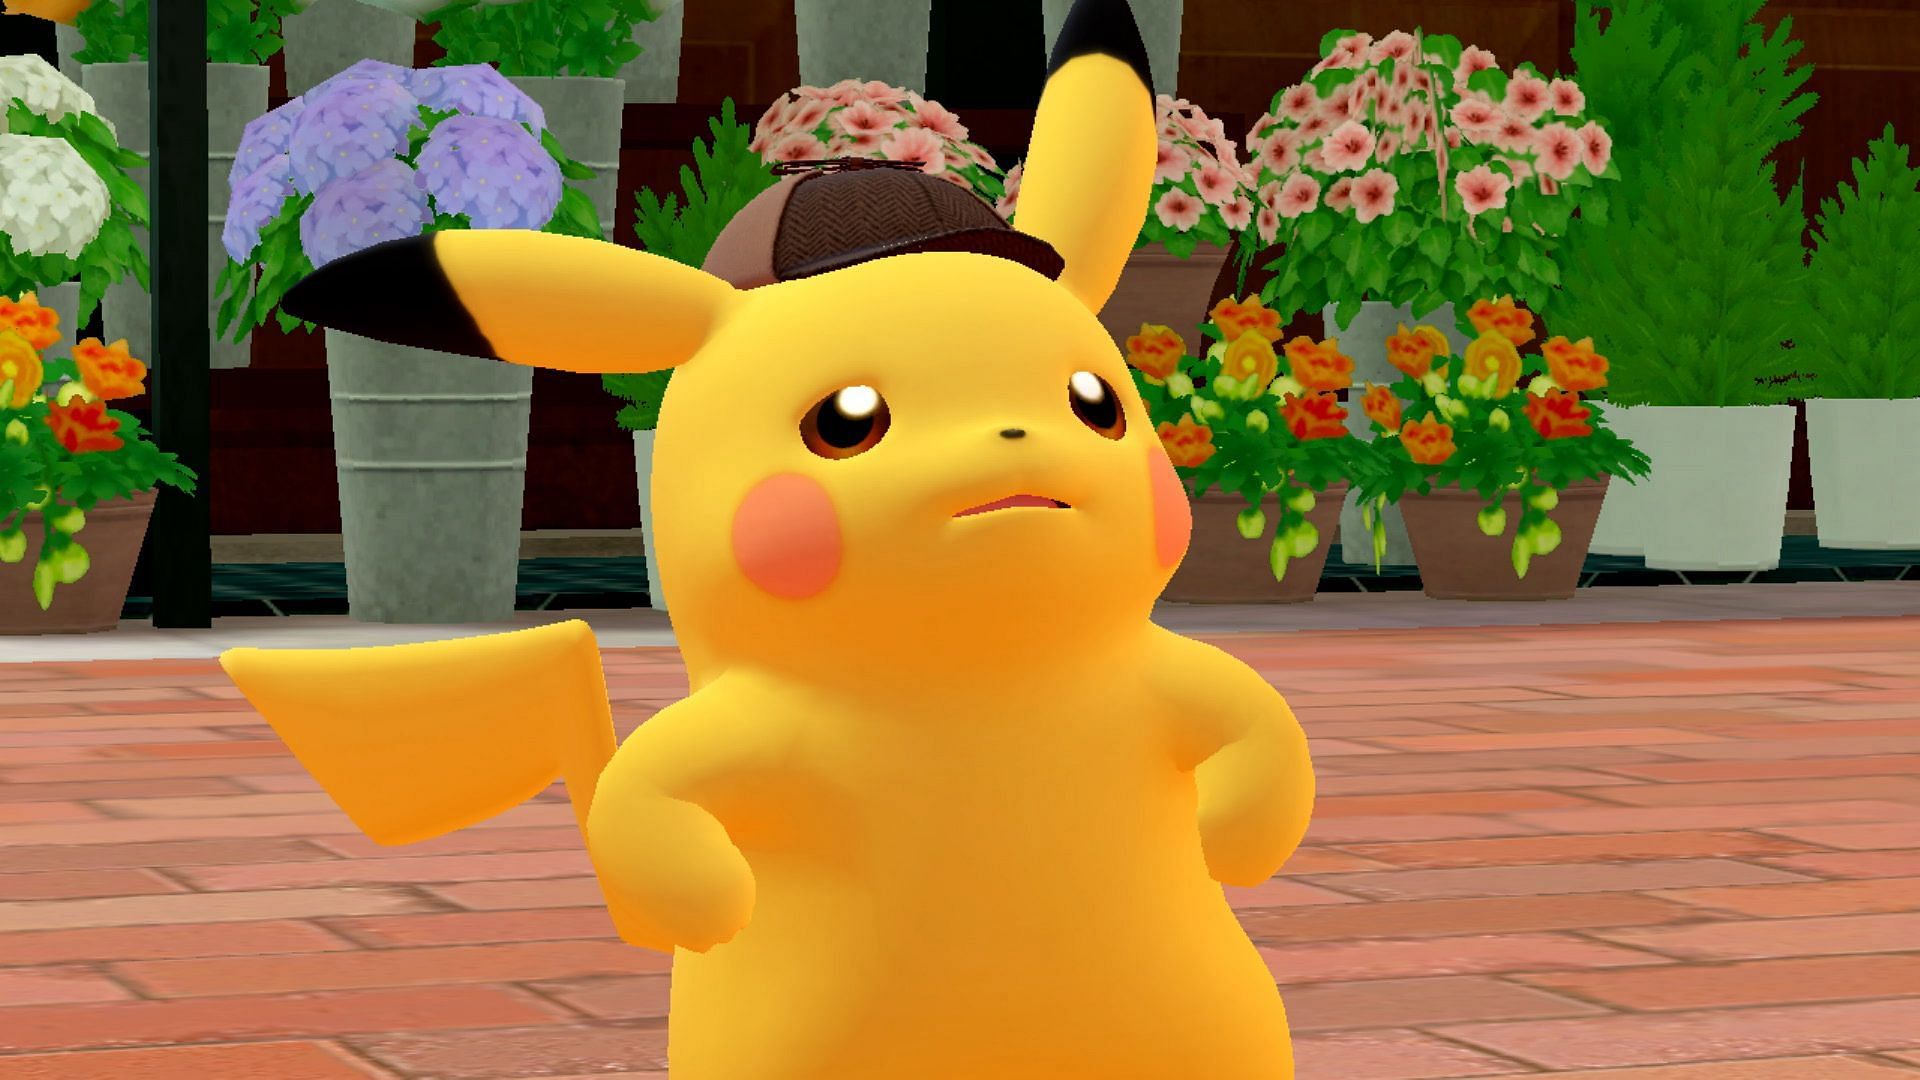 Detective Pikachu: Why fans are so upset about the new Pokémon